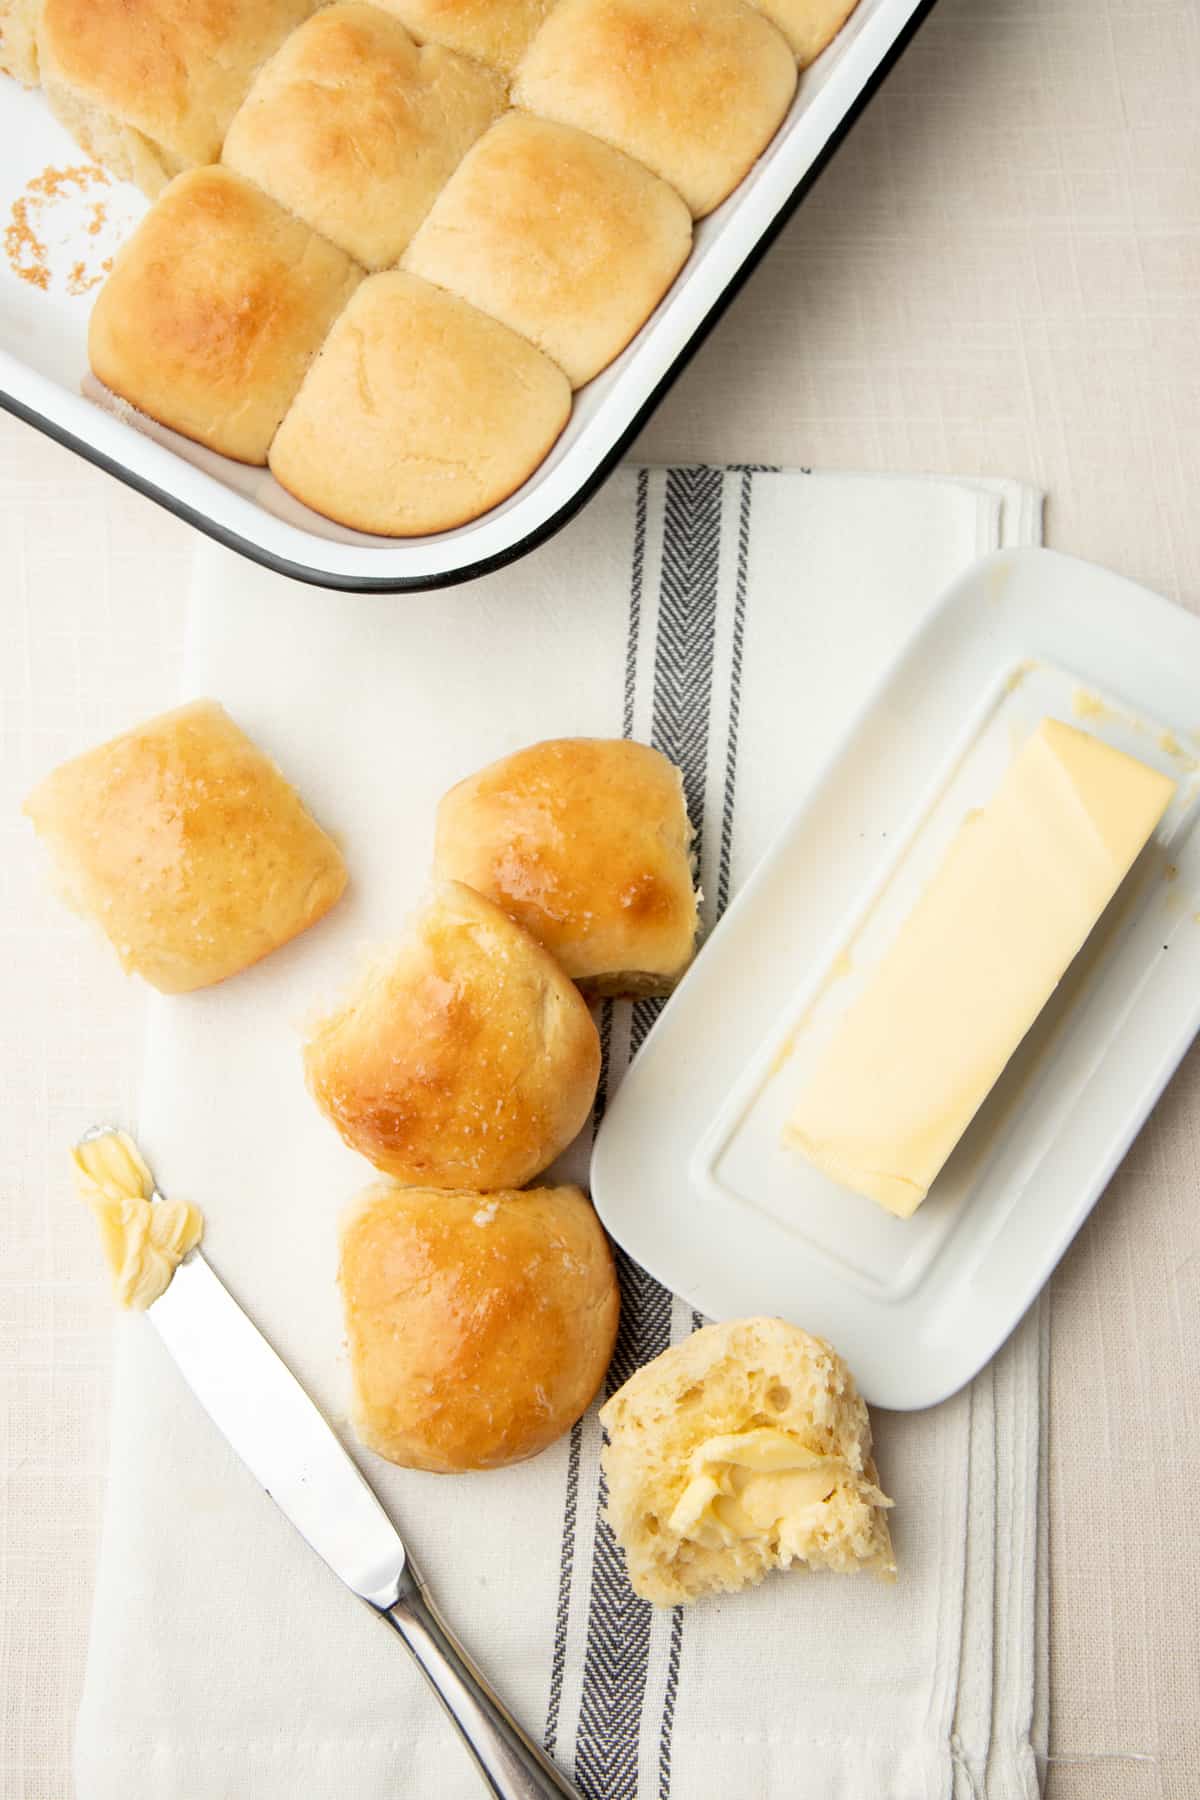 Rolls lay scattered on a fabric napkin, next to a dish of butter. A knife with butter is ready to spread on one of the rolls.